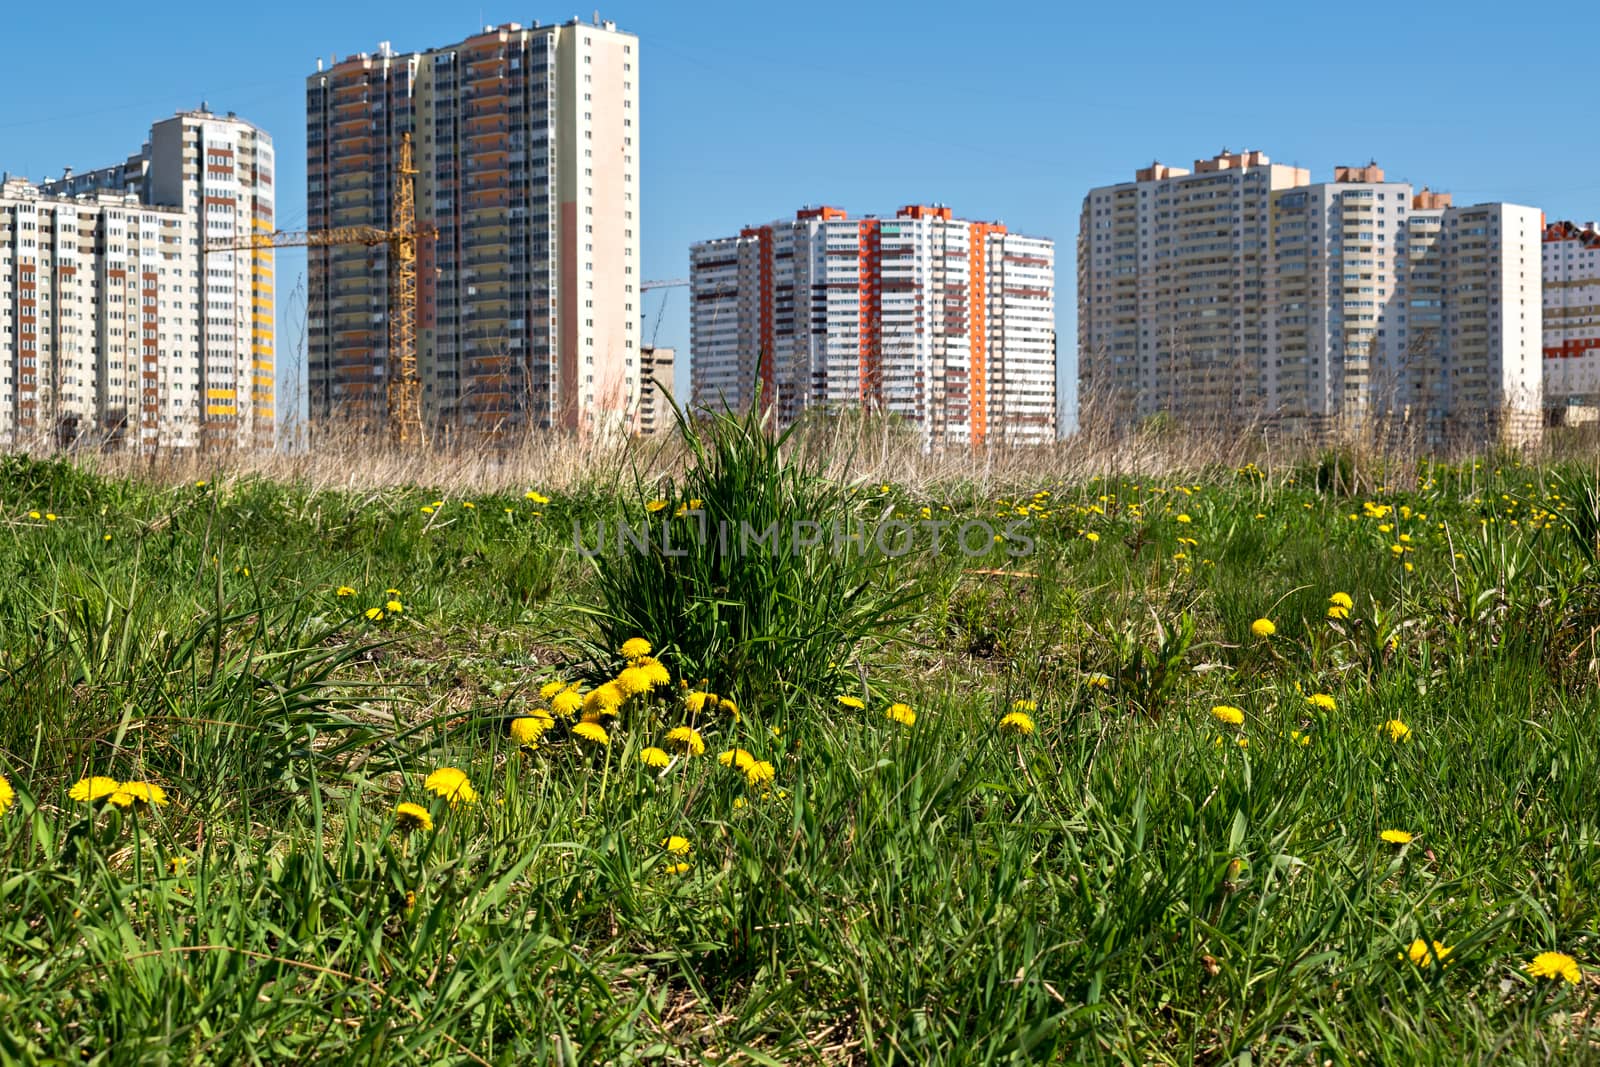 Field overgrown with green grass and dandelion flowers against the background of multi-storey residential buildings